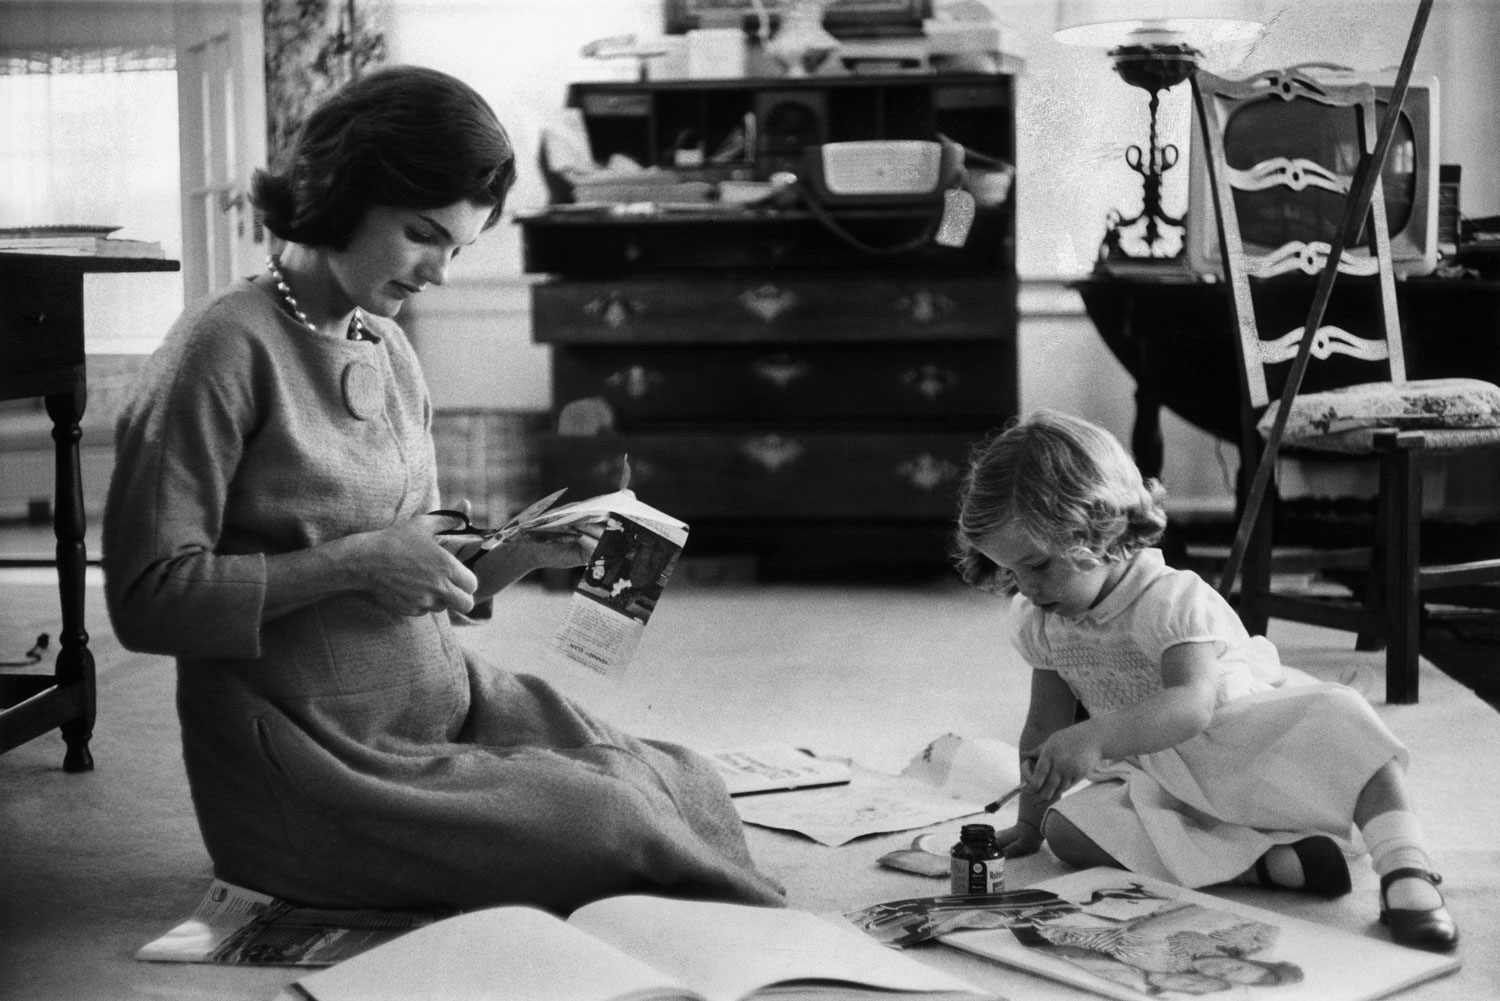 Jackie Kennedy cuts newspaper clippings next to an open scrapbook as her daughter Caroline toys with the applicator from a glue bottle, 1960.